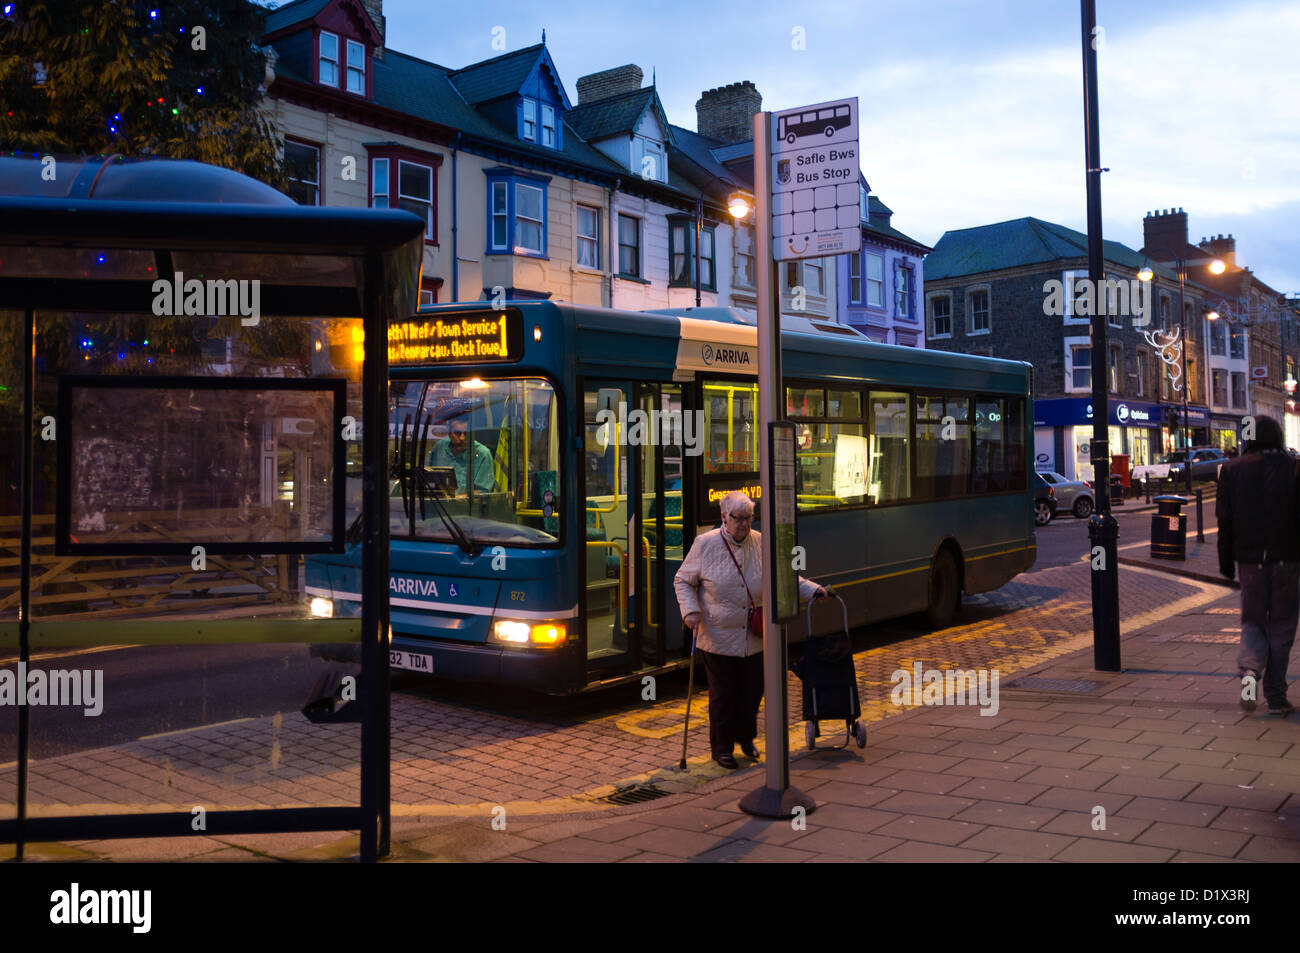 A Arriva bus at a bus stop, at night, UK Stock Photo